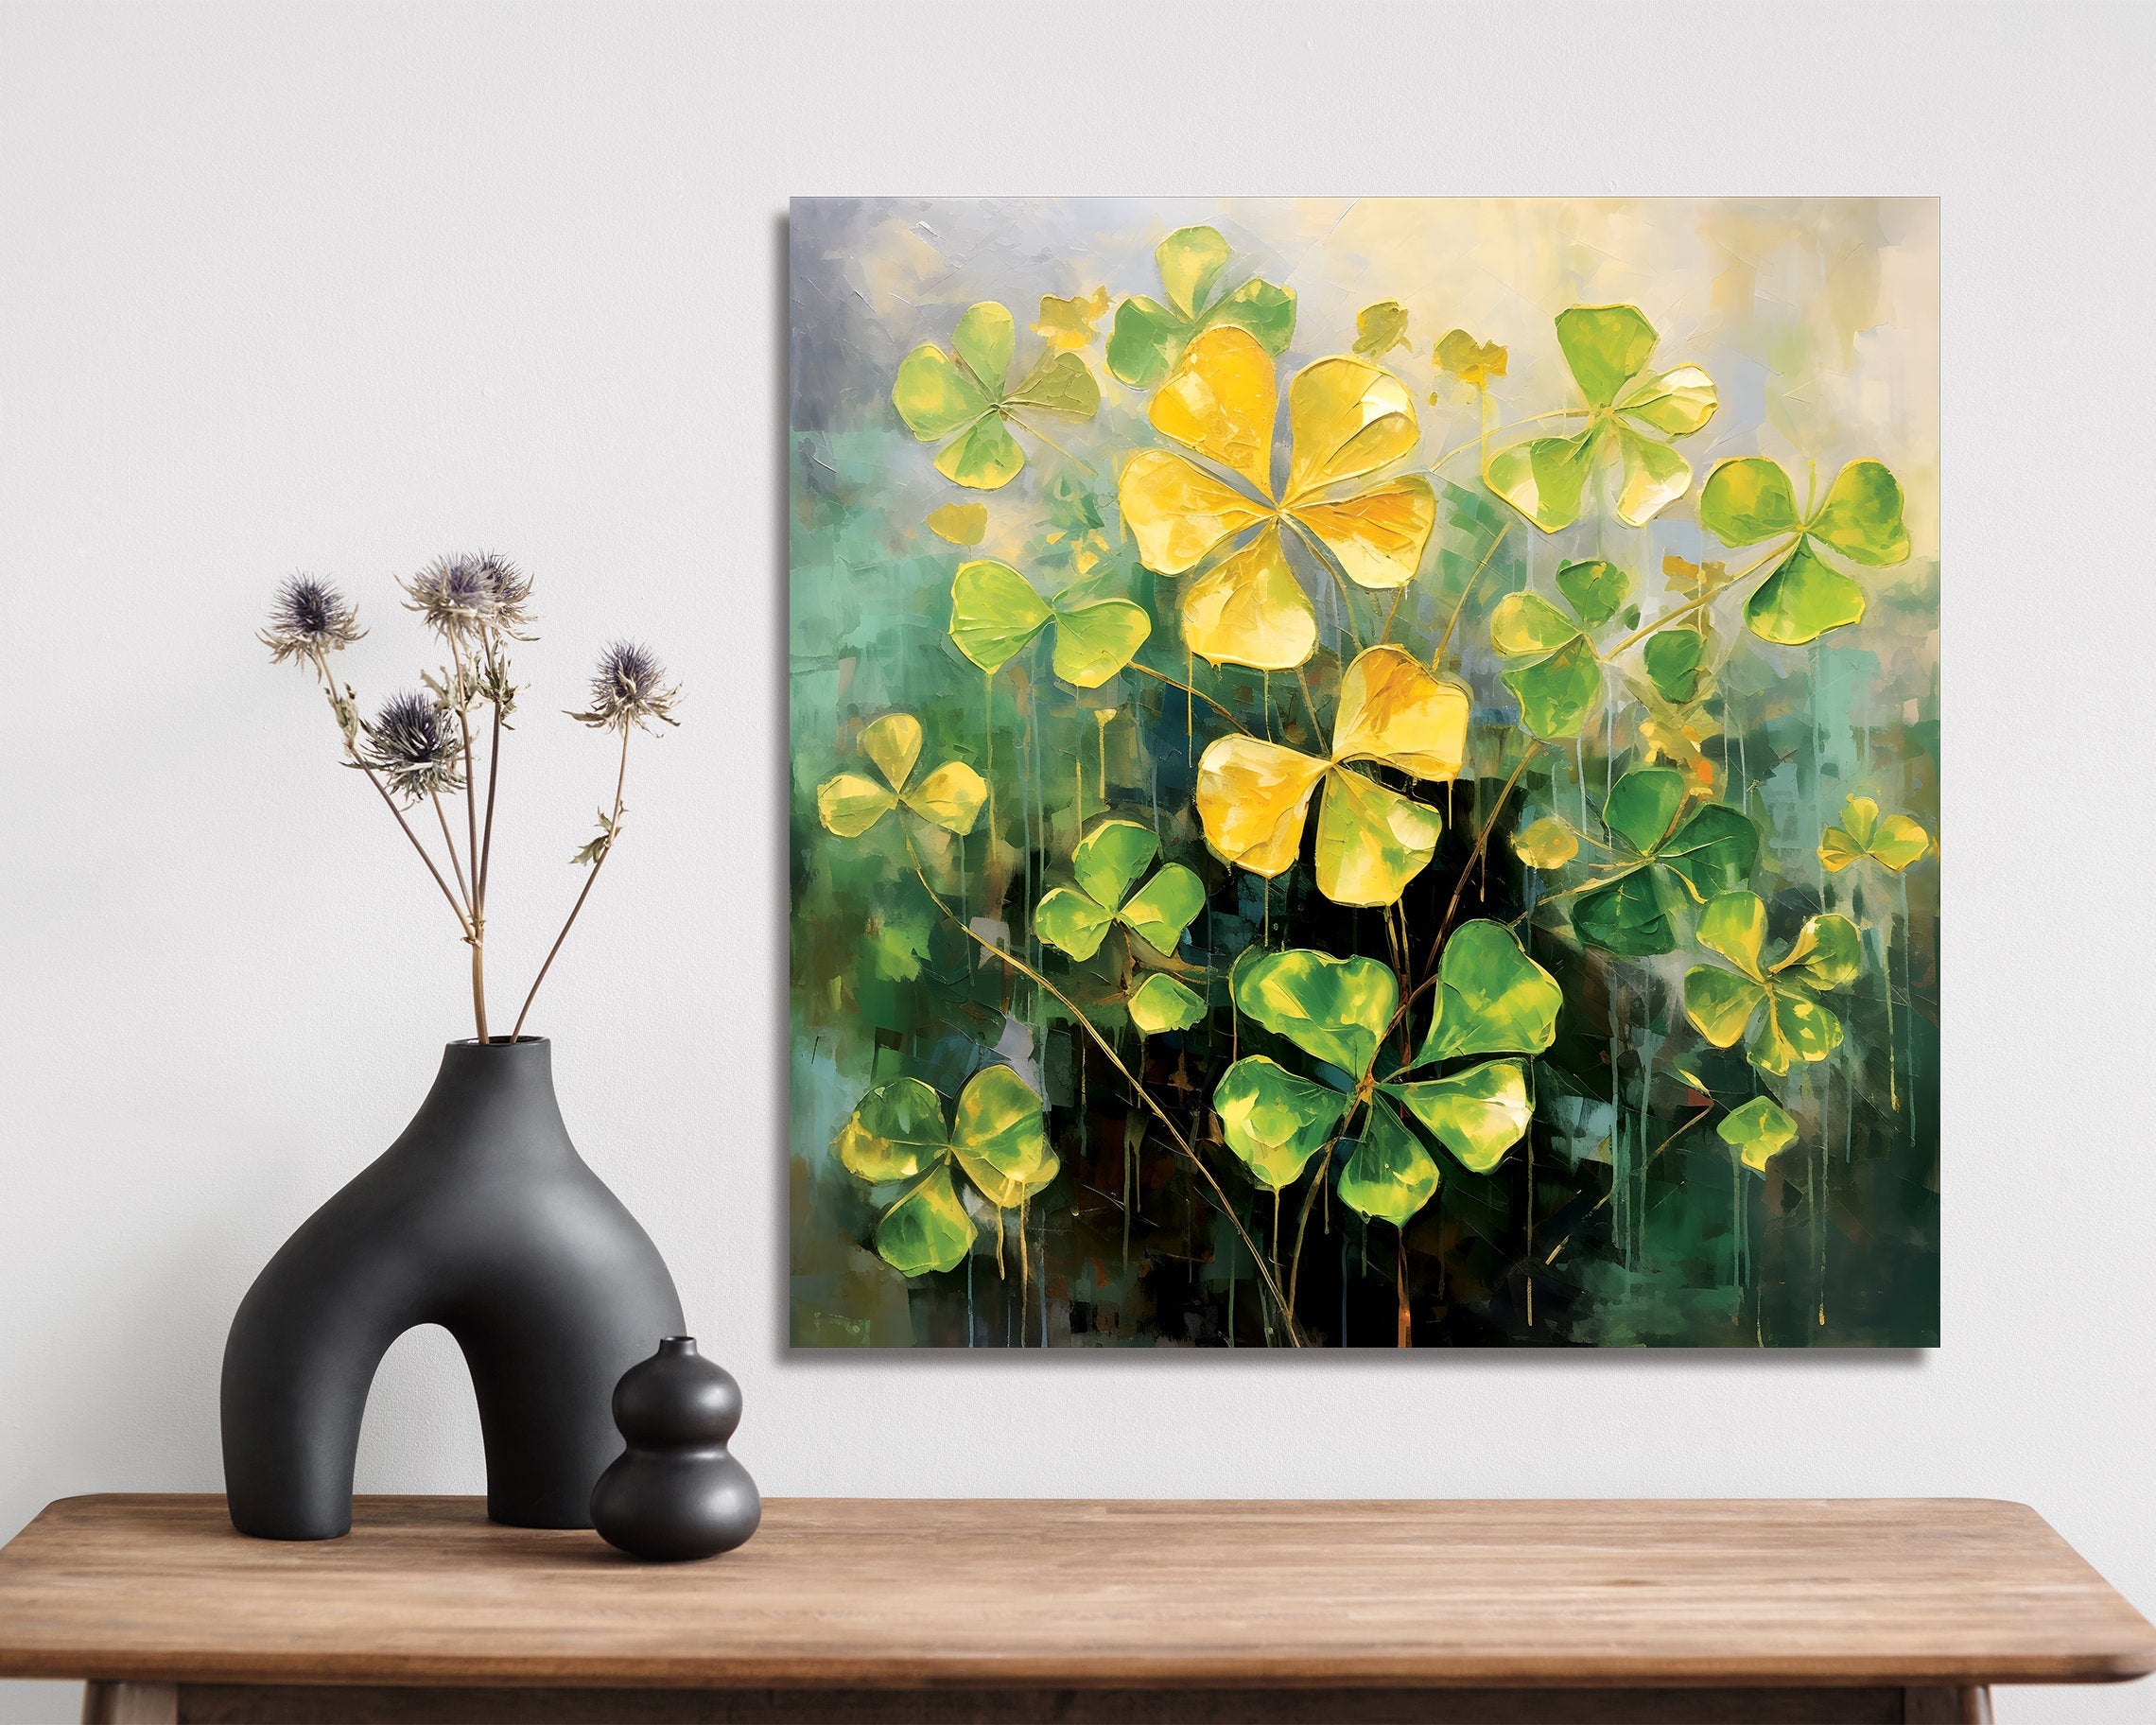 12-Inch-Oil-Painting-Style-of-a-Colorful-Shamrock-Modern-Farmhouse-Canvas-UV-Print-Wall-Art,-St.Patrick's-Day-Wall-Decor-Living-Room-Decor-